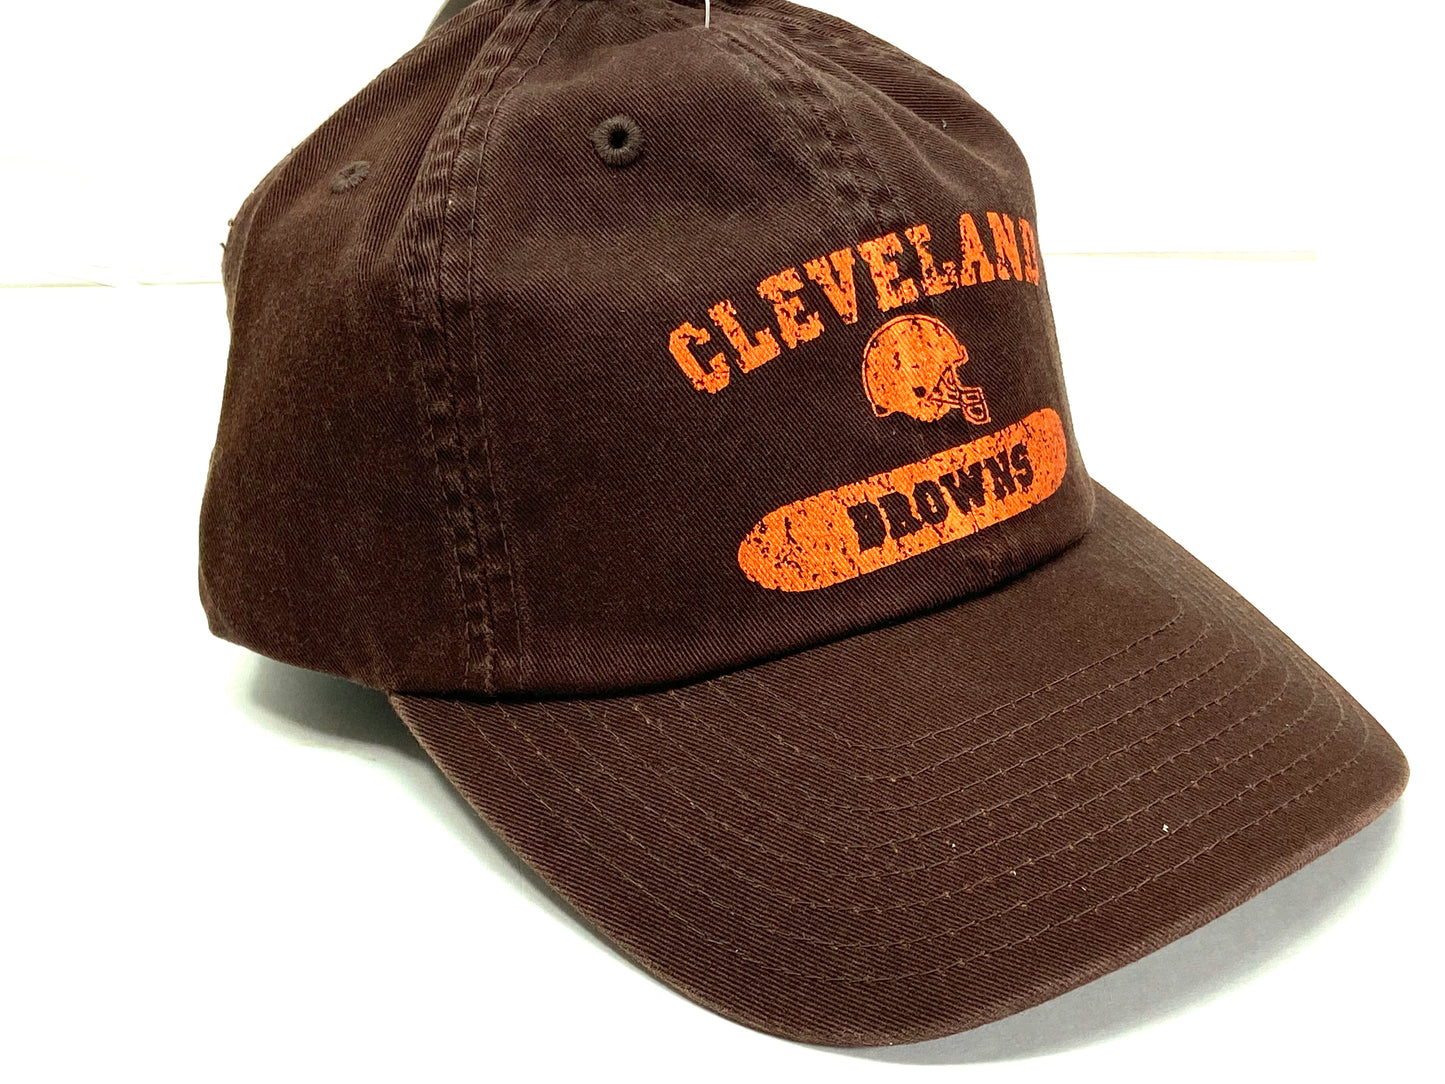 Cleveland Browns Vintage NFL "Aged" Unstructured Brown Cap By American Needle